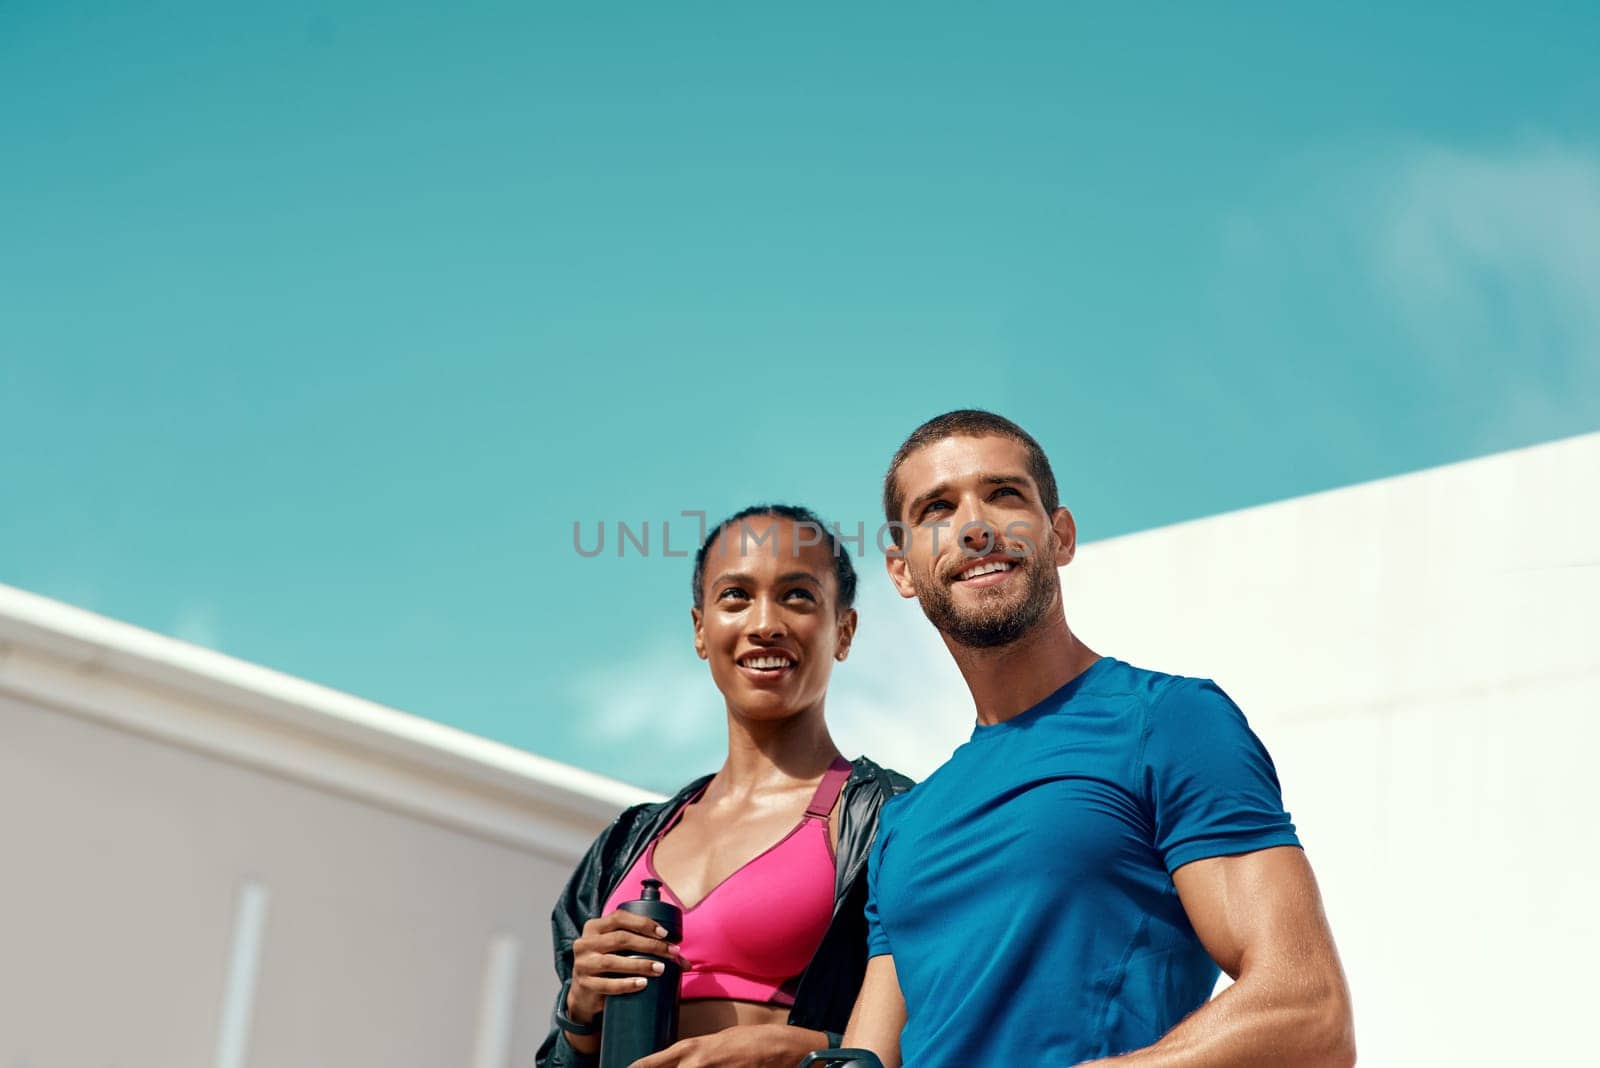 People, fitness and outdoor in sportswear for exercise, training or workout with blue sky. Personal trainer, man and woman together ready for thinking, gym and physical activity for summer body.